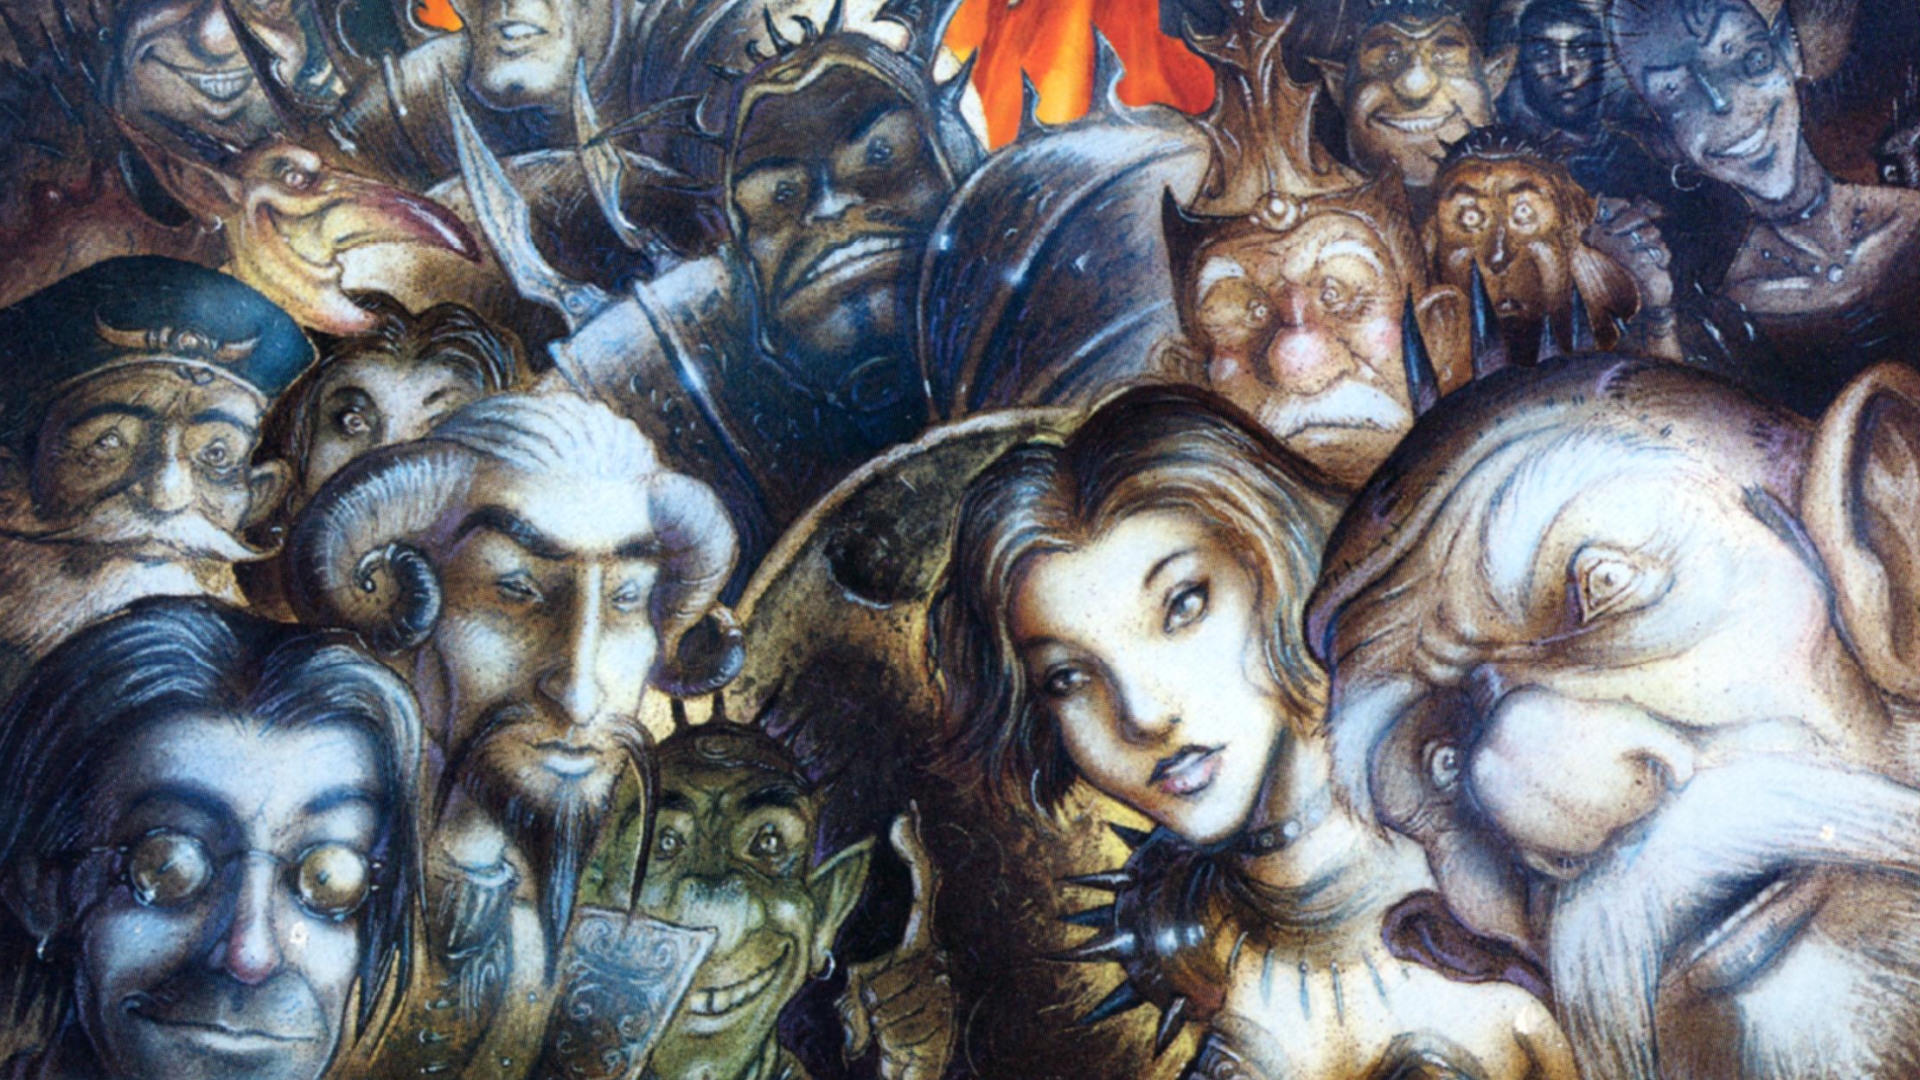  Next year's D&D releases include Planescape 